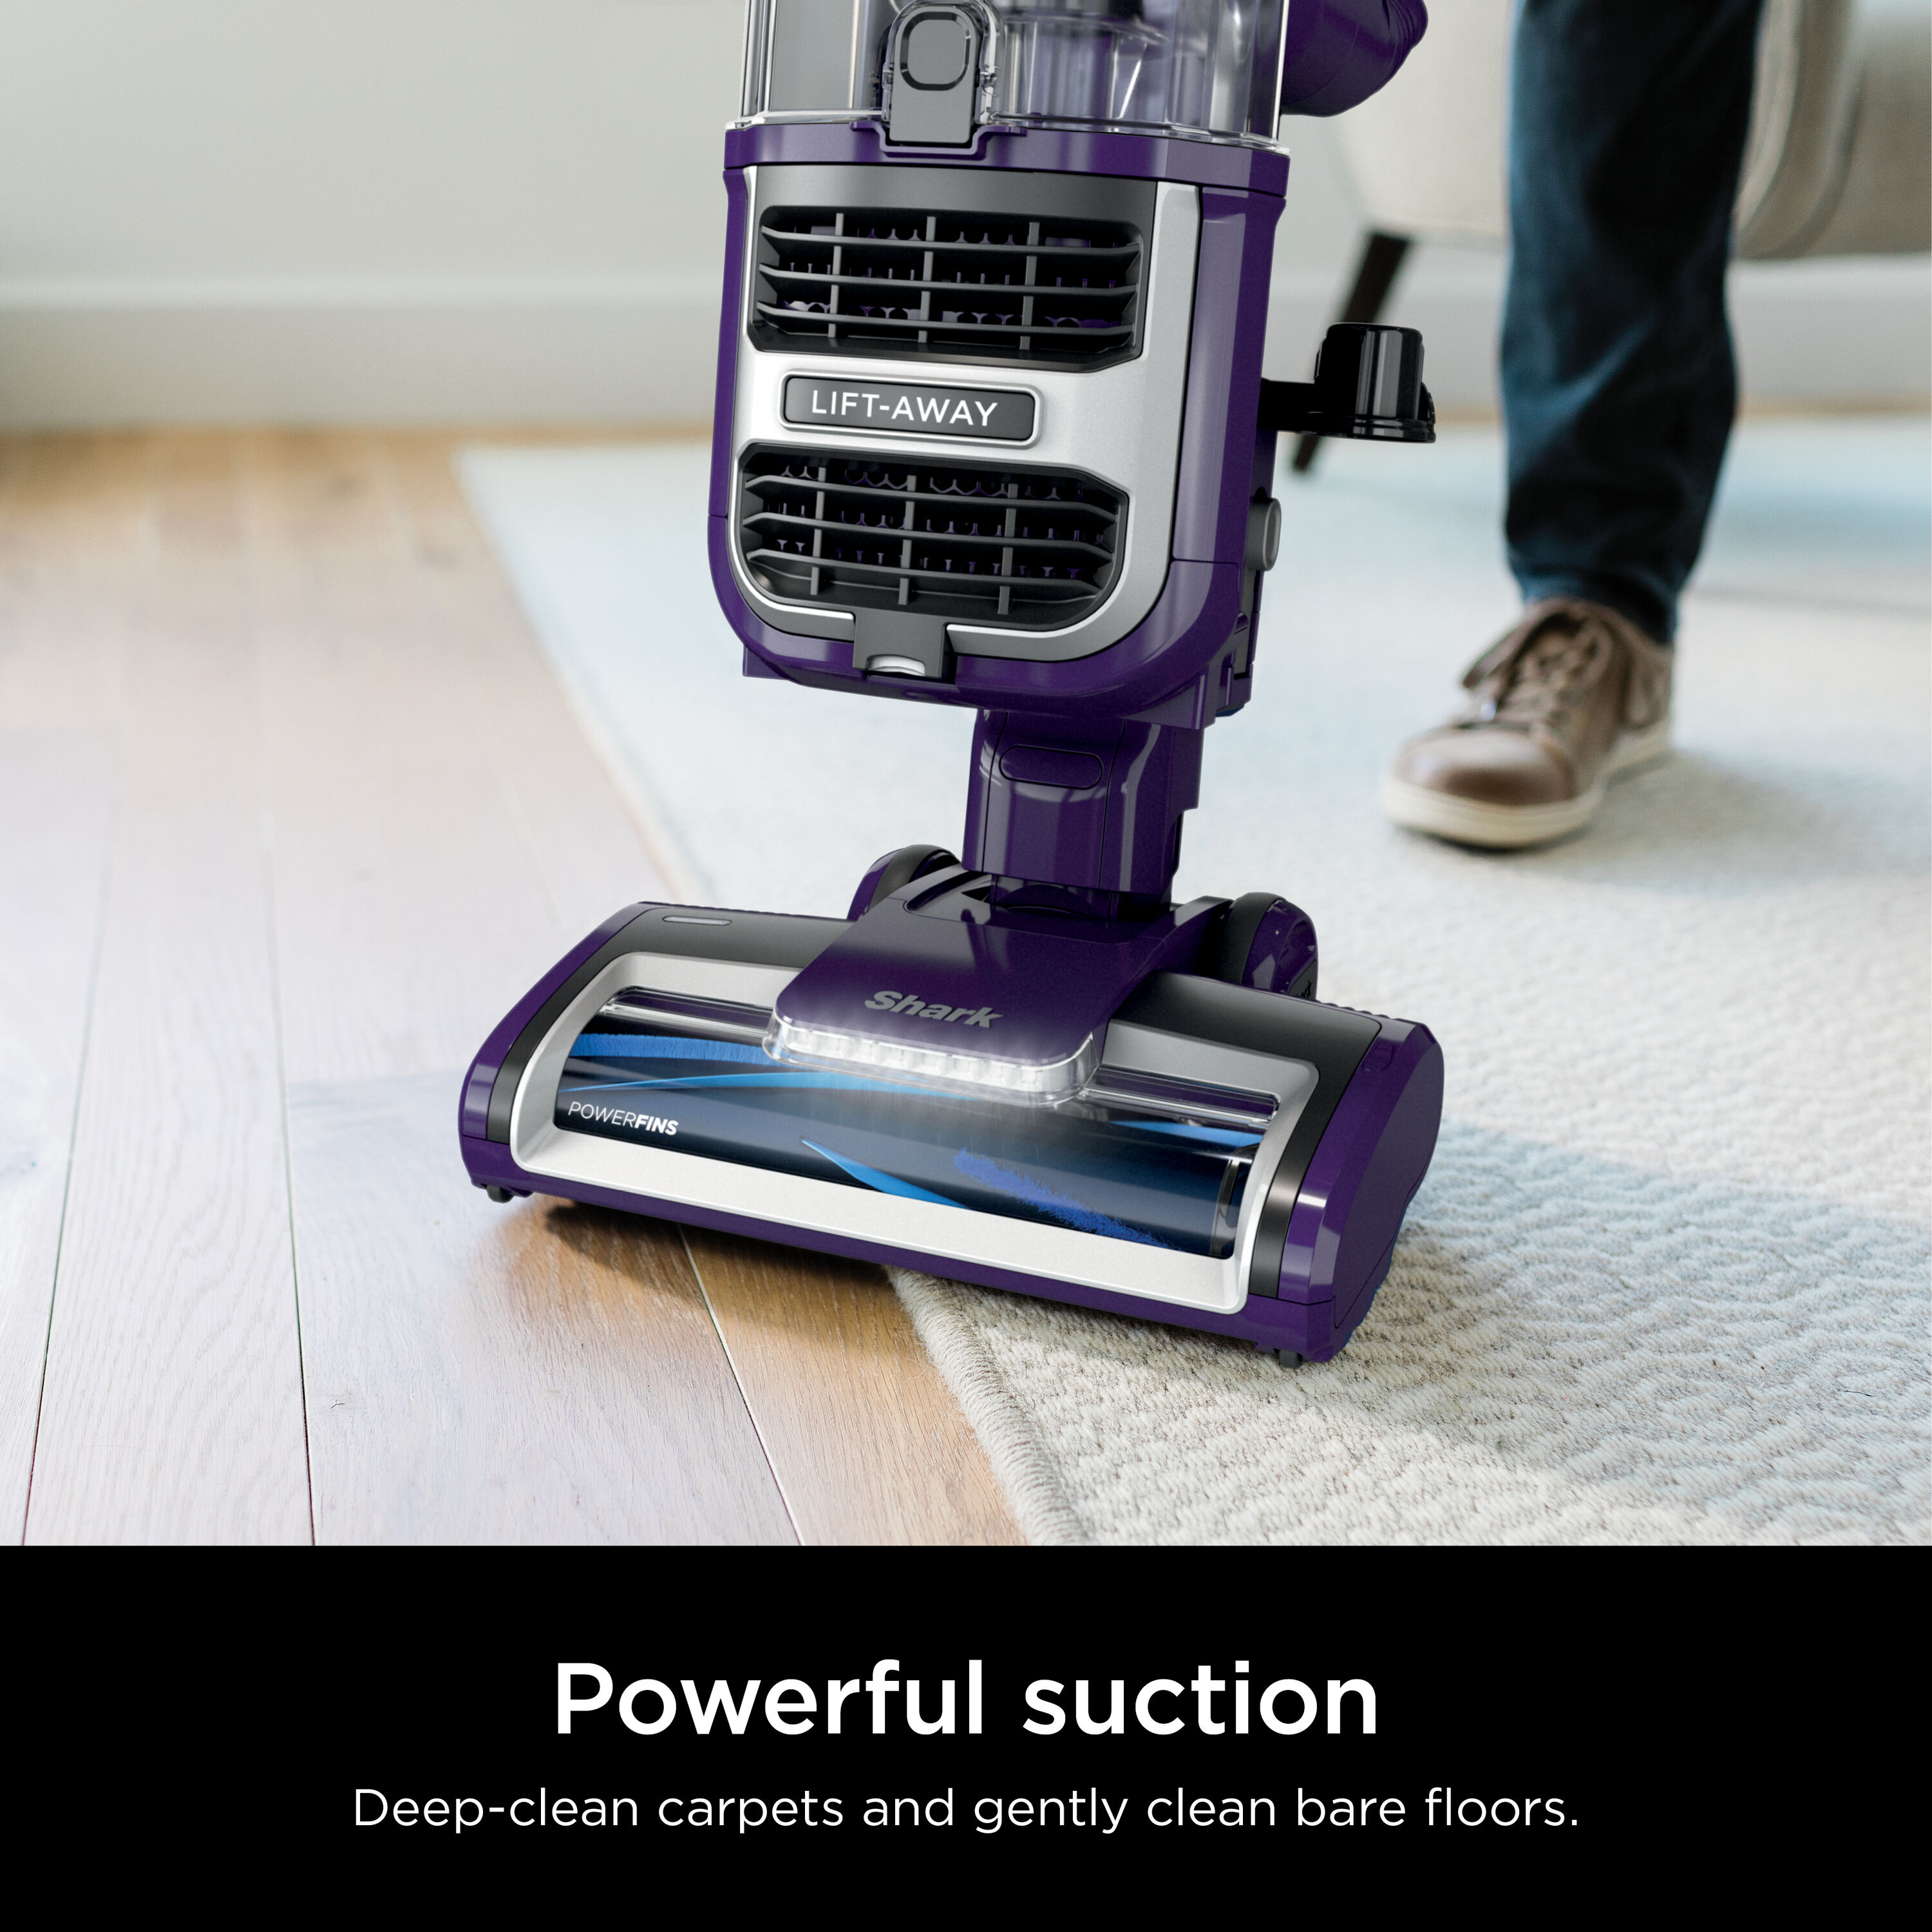 Whall Mini Portable Cordless Handheld Vacuum With 8500 Pa, Washable Filters,  A Lightweight Wet Dry Vac Feature : Target